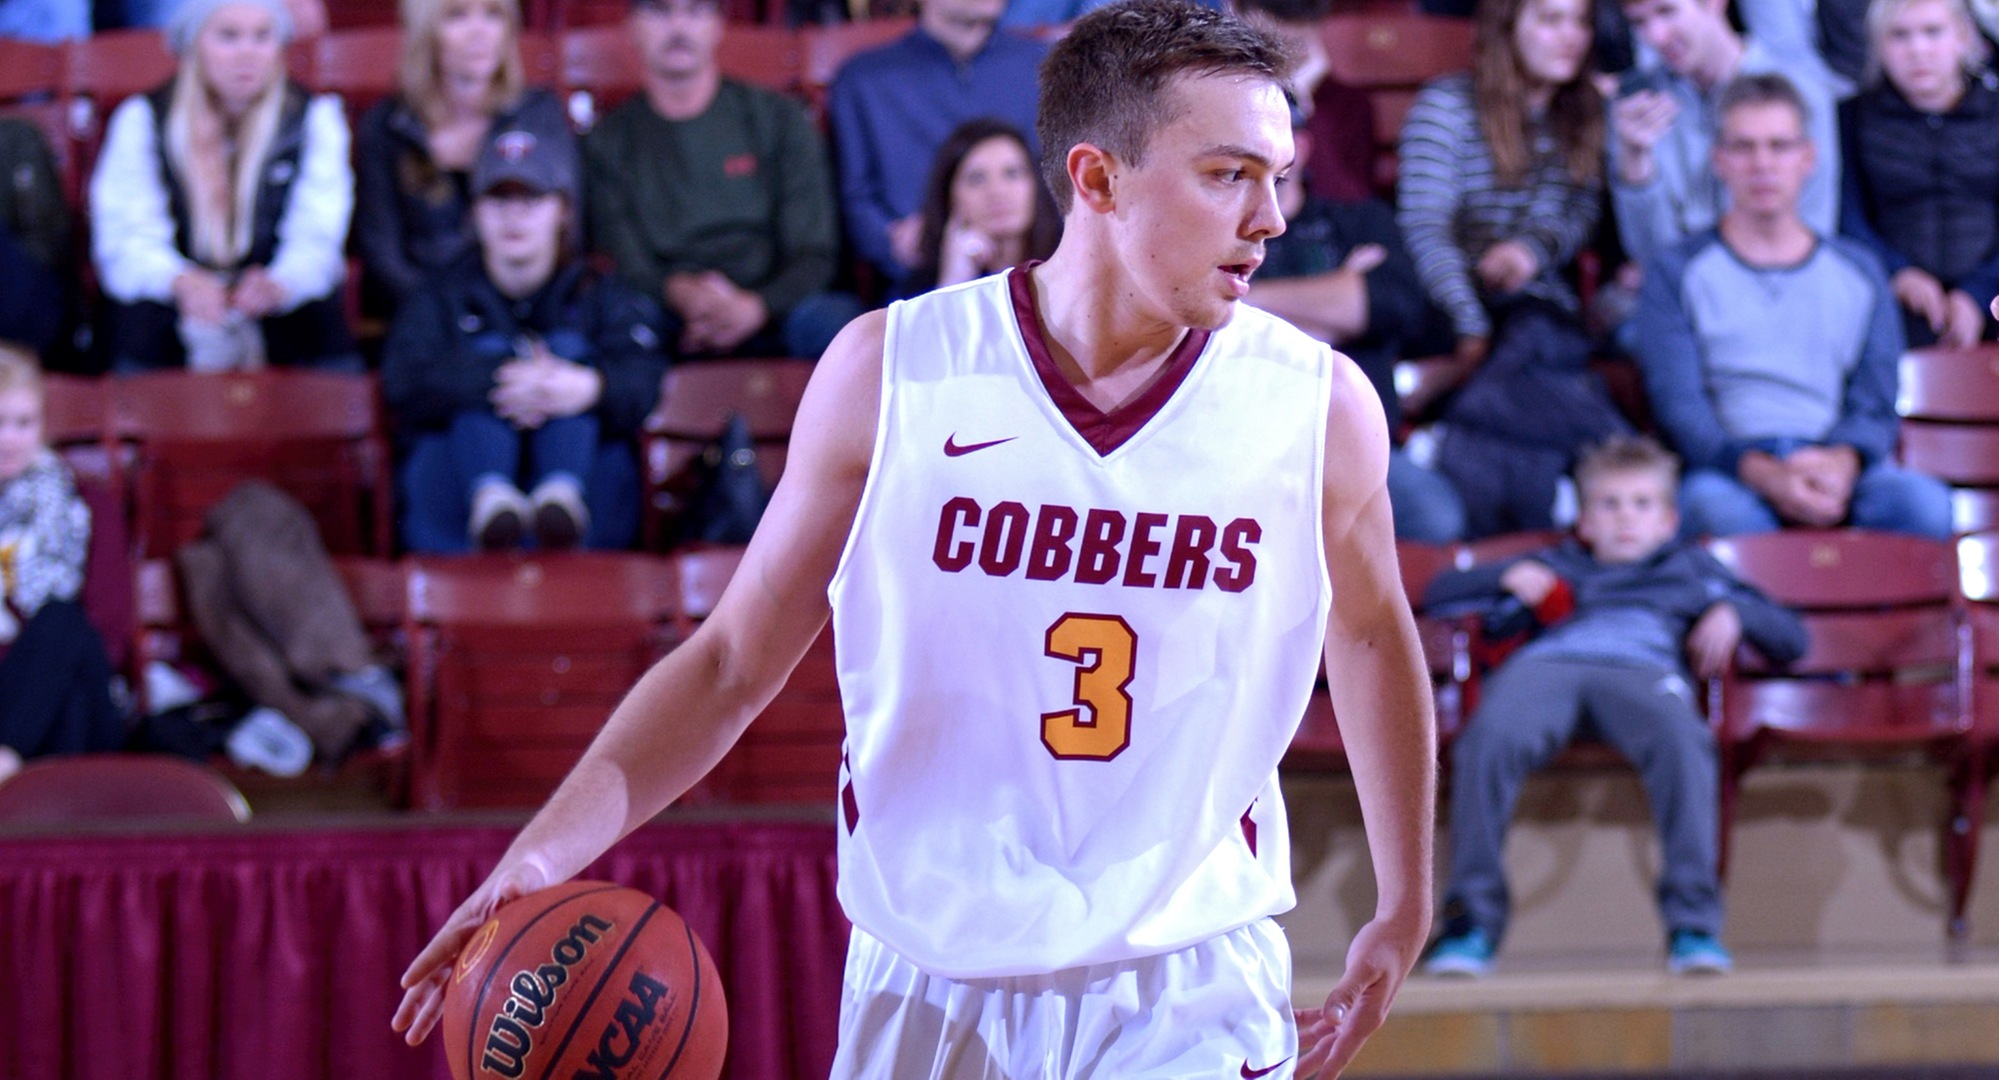 Senior Zach Kinny hit a 3-pointer with .02 seconds left to go to give the Cobbers a 74-73 win over St. John's. Kinny also had 10 rebounds and six assists.